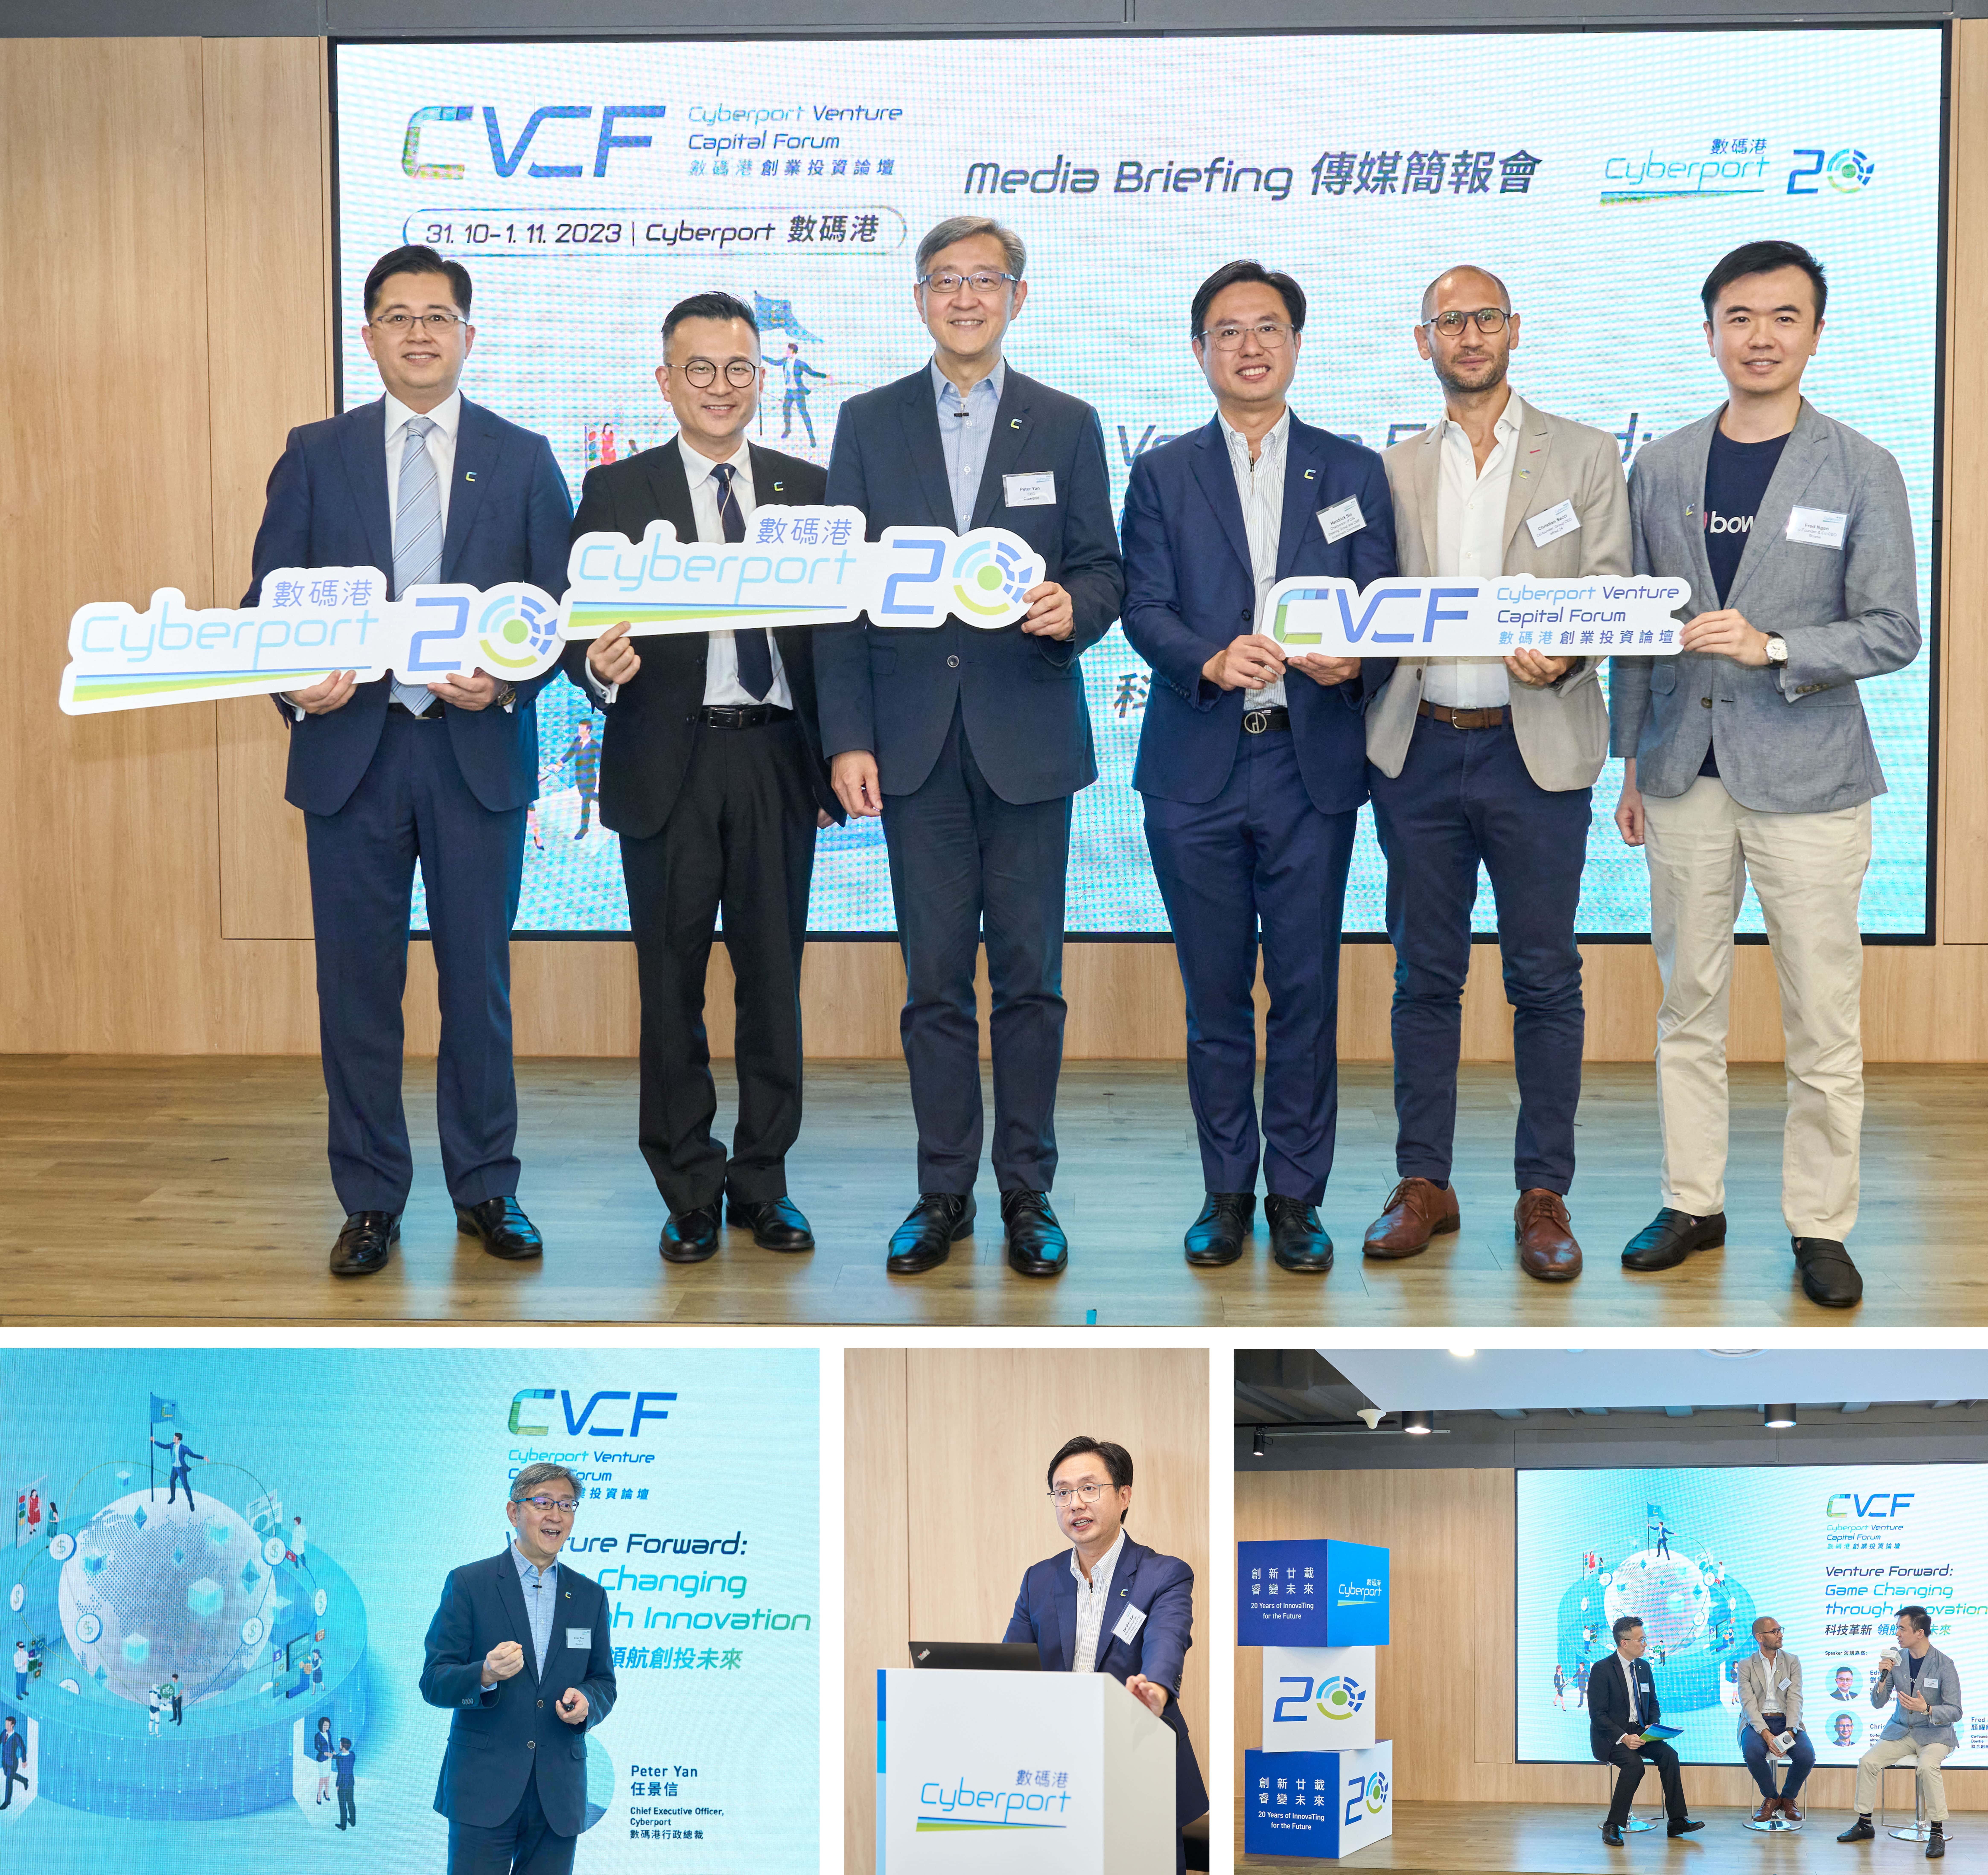 In the face of ongoing global uncertainties, economic challenges, and geopolitical issues, the annual Cyberport Venture Capital Forum (CVCF) is set to return from October 31 to November 1 this year, with the inspiring theme of 